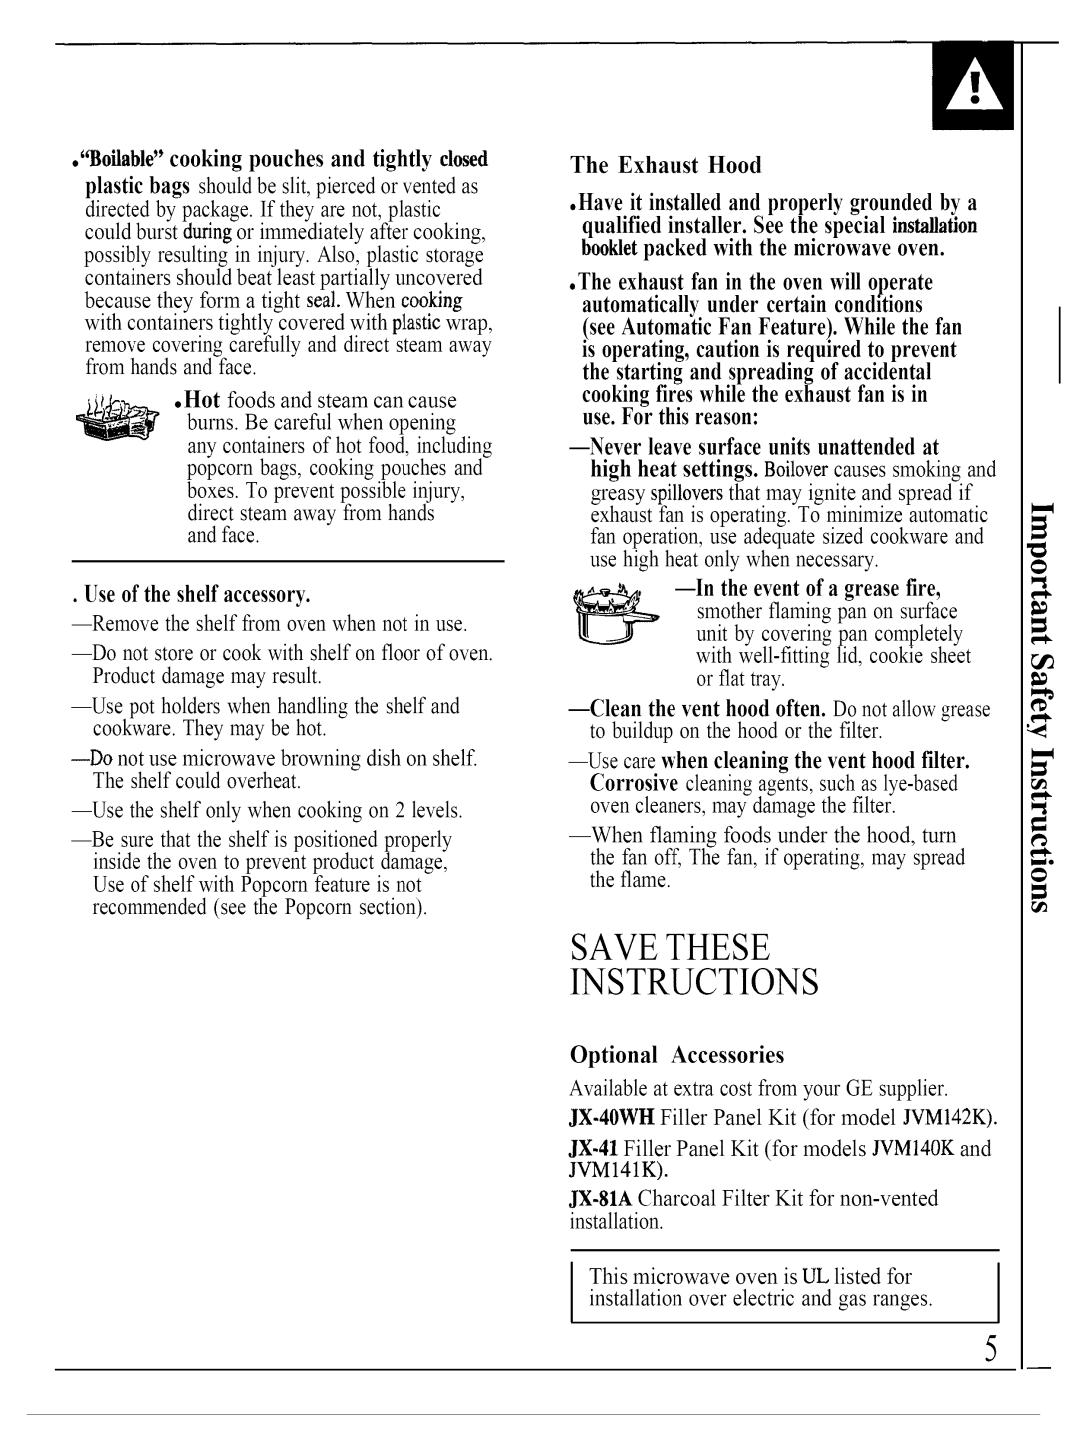 GE JVM140K operating instructions Save These Instructions, Usethe shelf only when cookingon 2 levels, The Exhaust Hood 